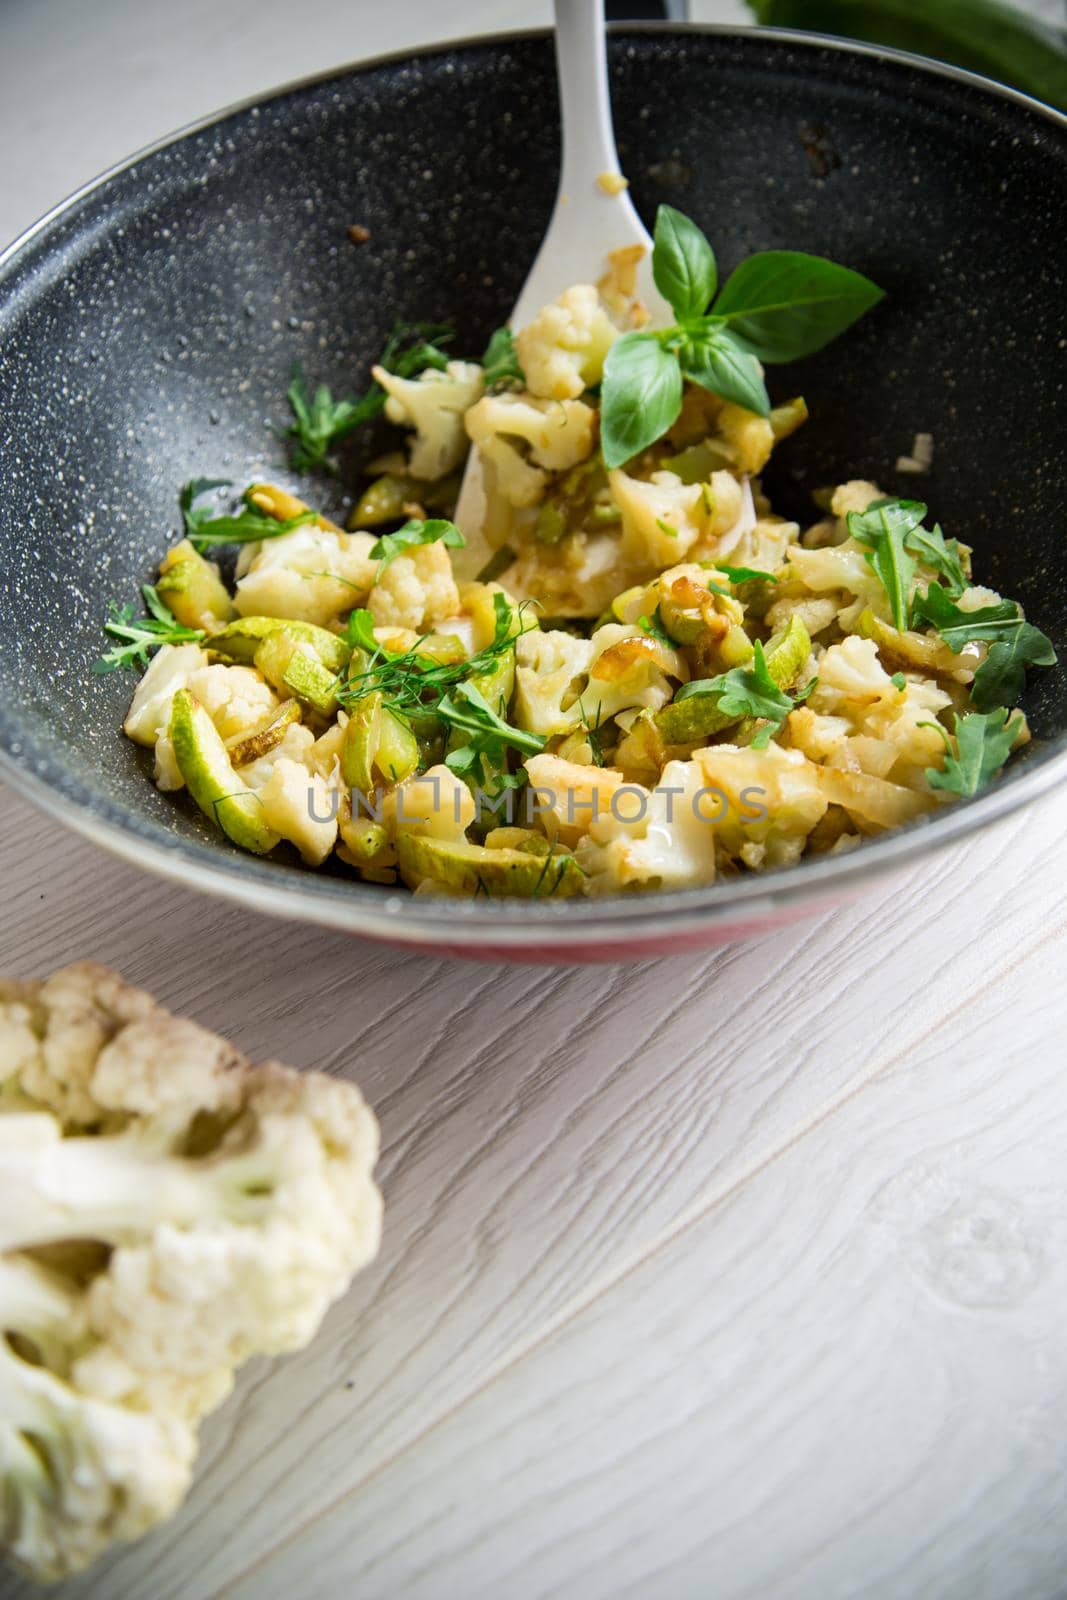 cauliflower fried with zucchini and vegetables in a pan by Rawlik